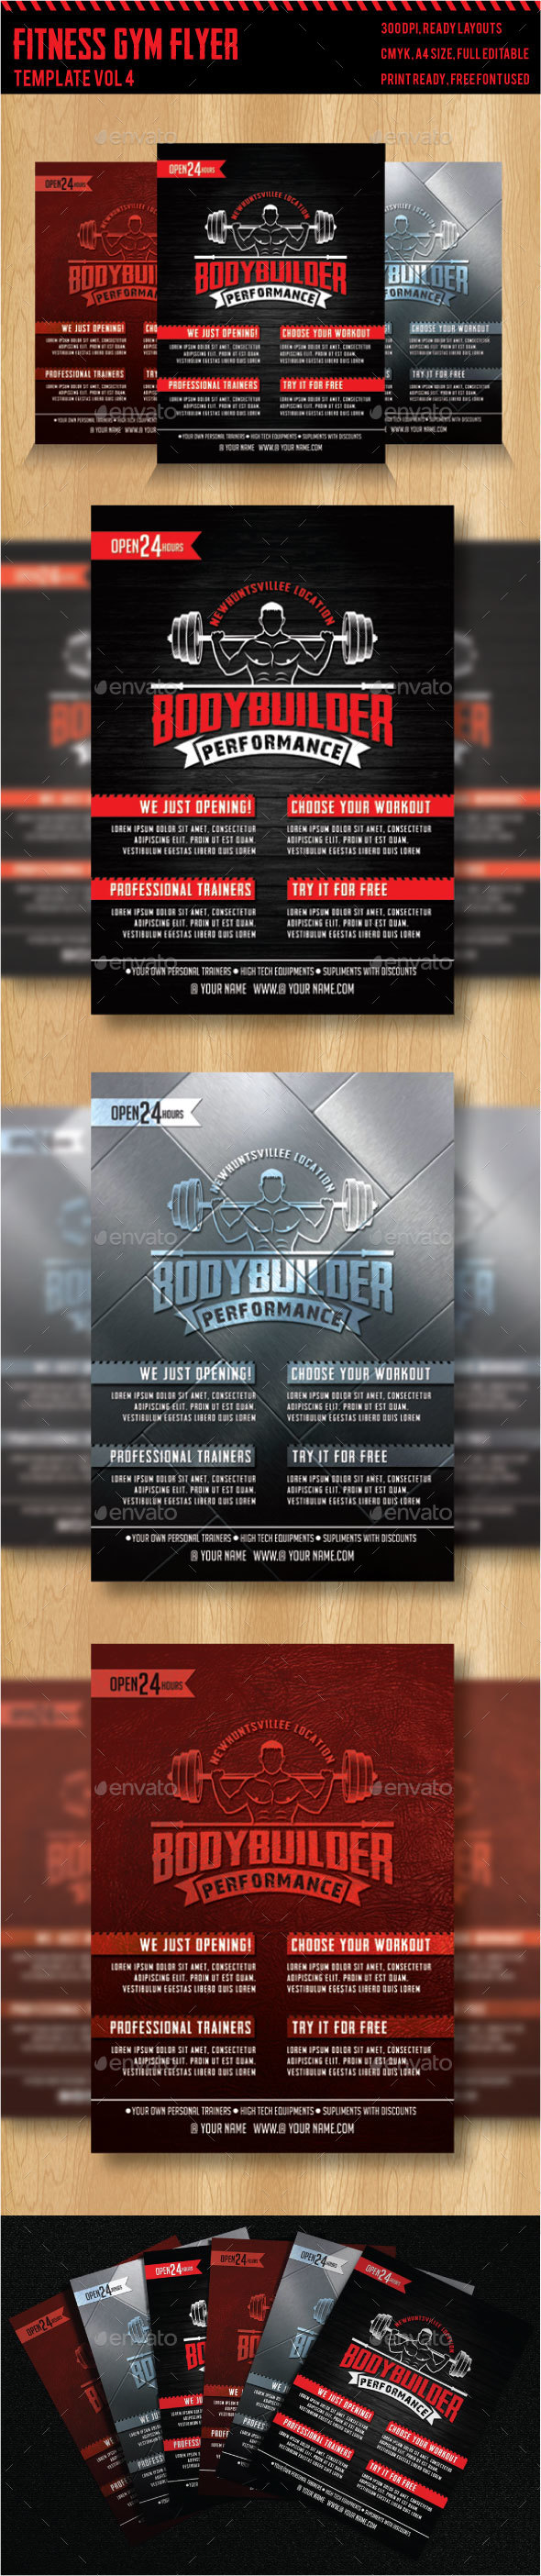 Fitness - Gym Flyer Templates 4